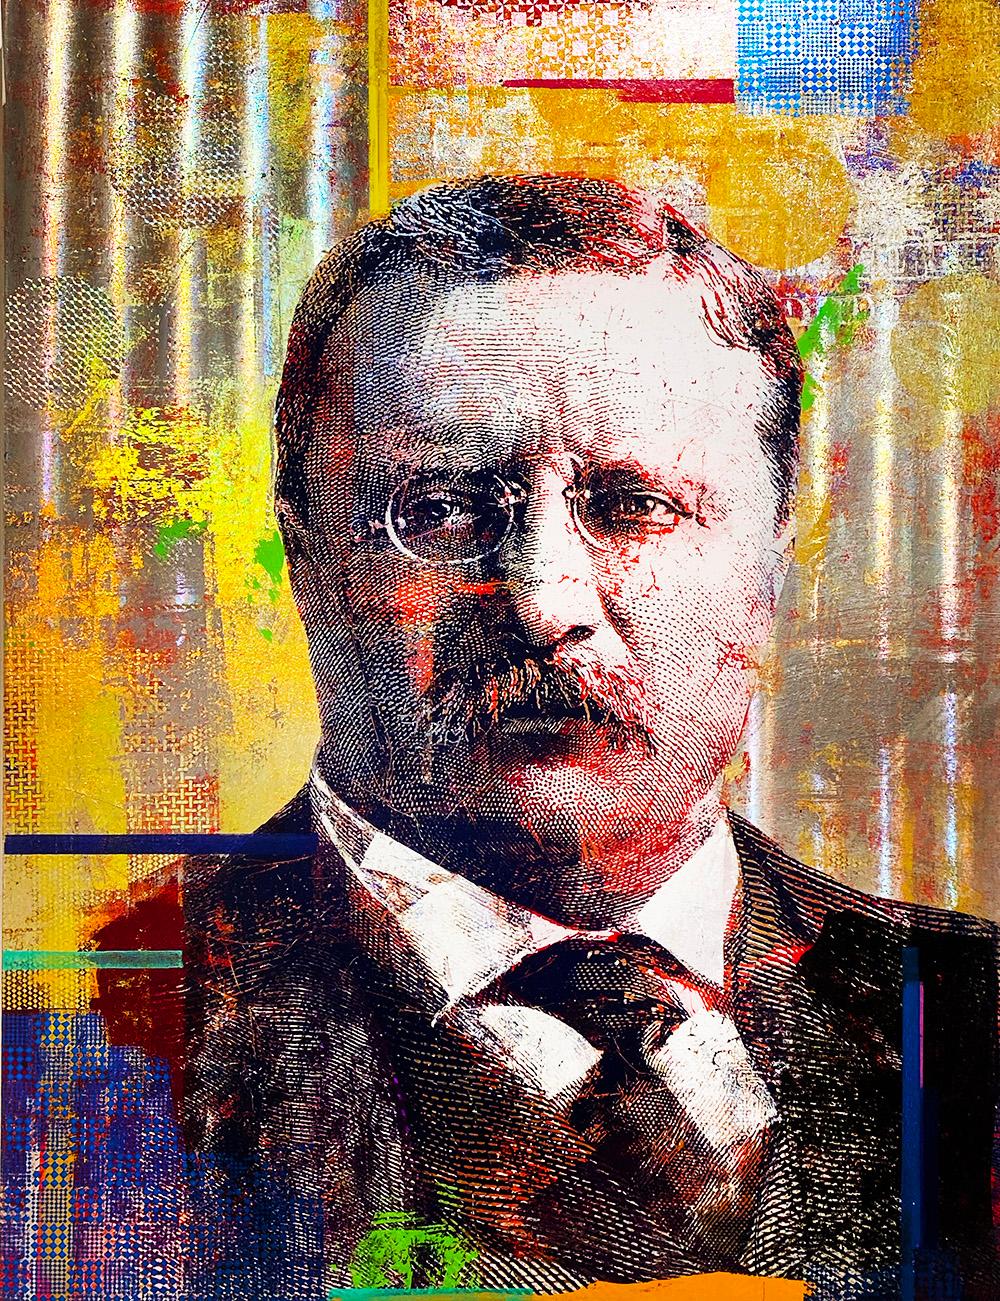 Houben R.T. Figurative Painting - 10 Dollars Coin Teddy Roosevelt